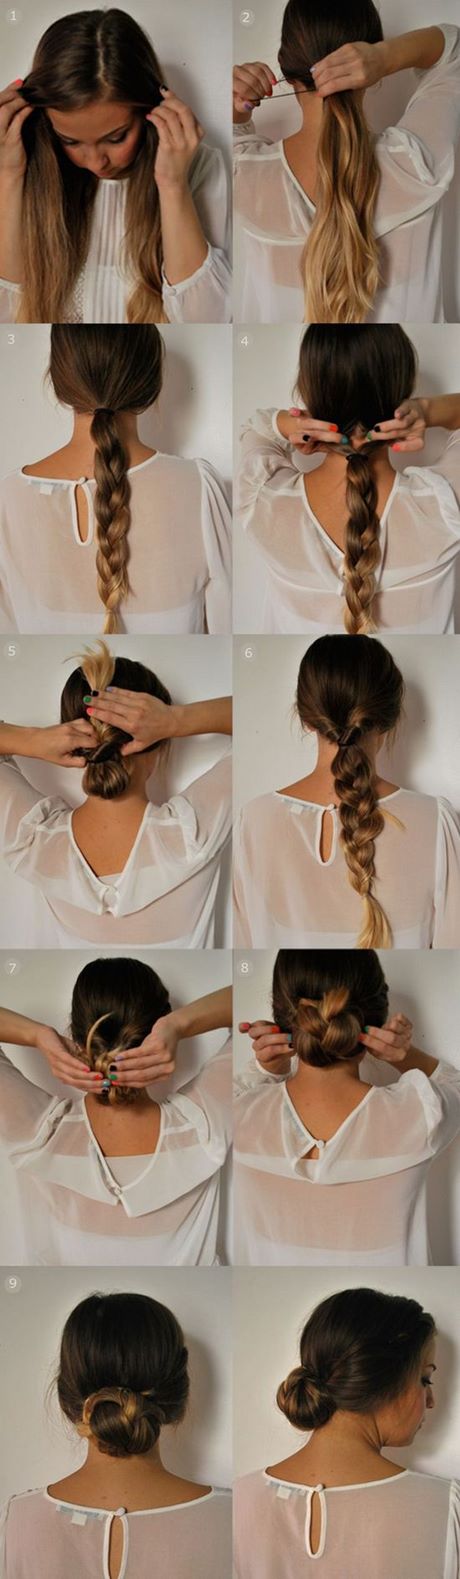 Simple up hairstyles for long hair simple-up-hairstyles-for-long-hair-69_7